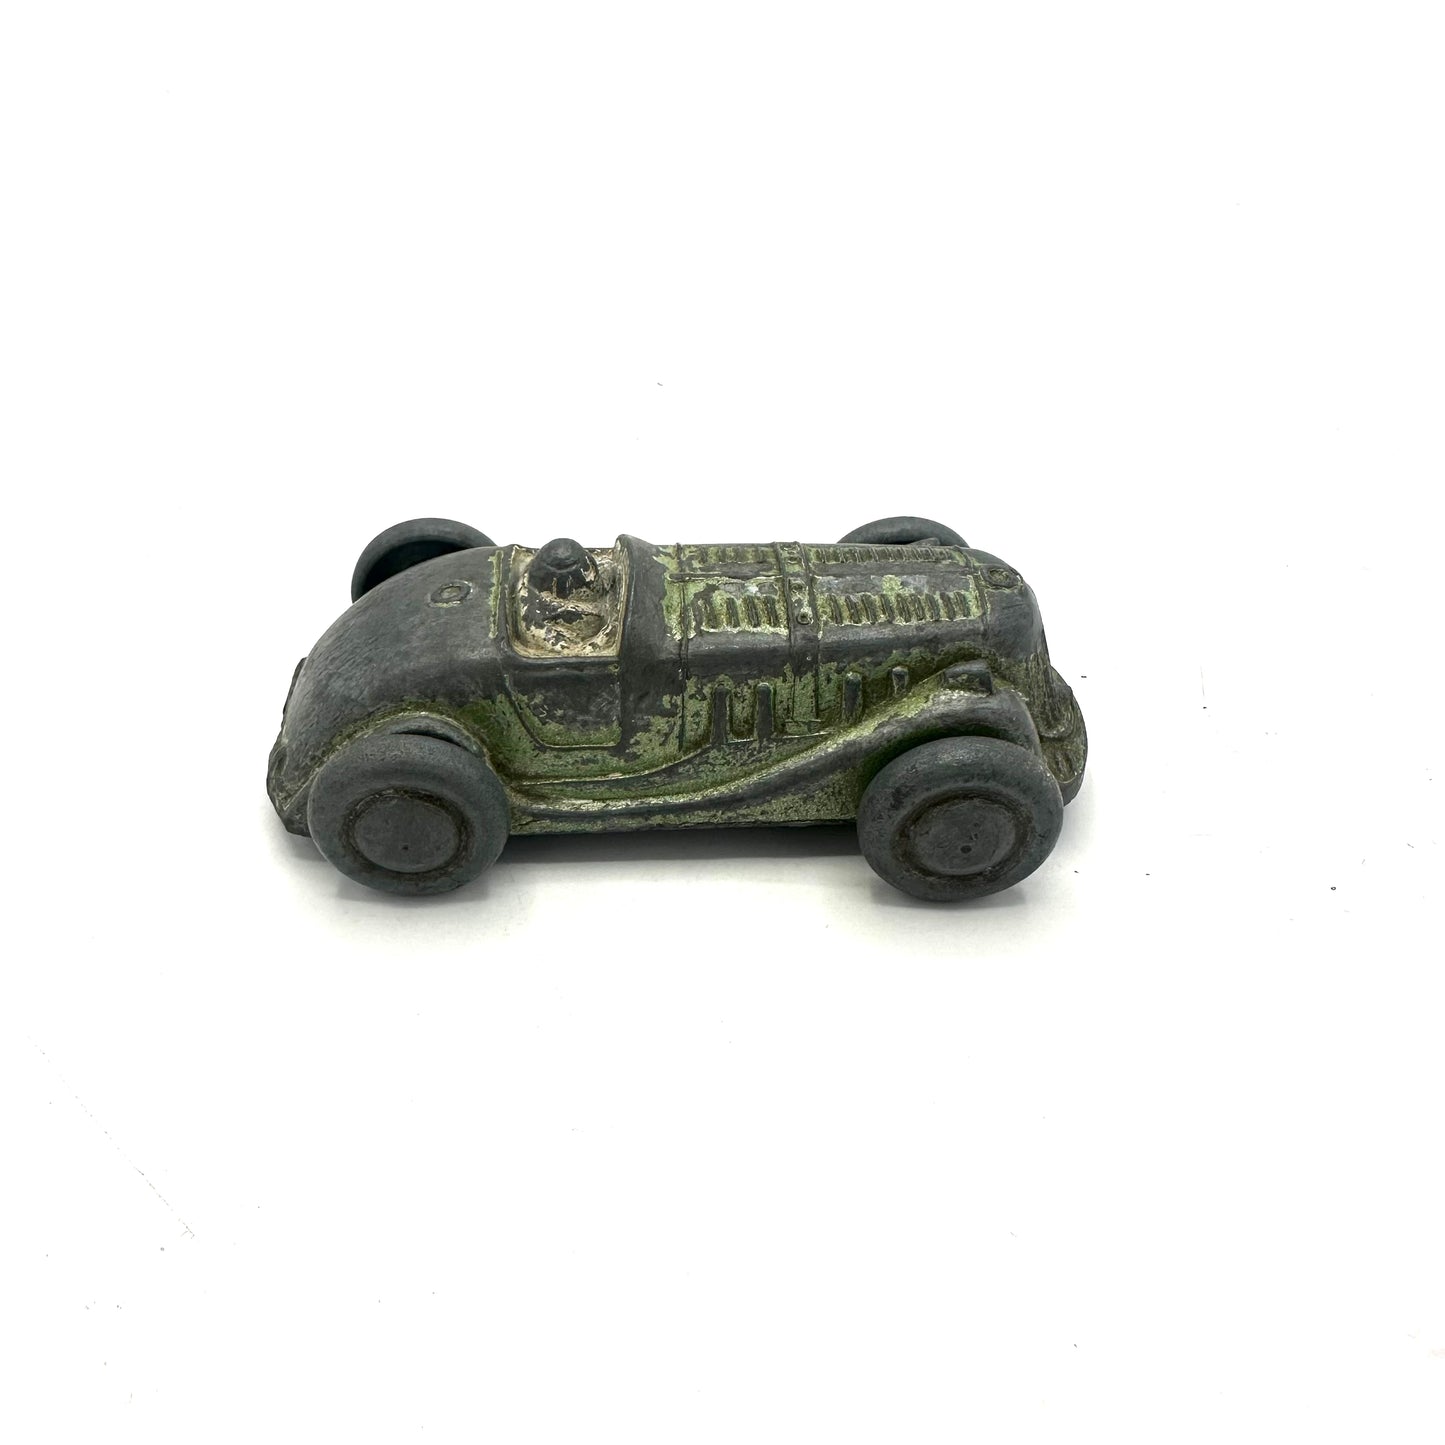 Vintage 1950s Gaiety Model Racing Car Push Pull Toy